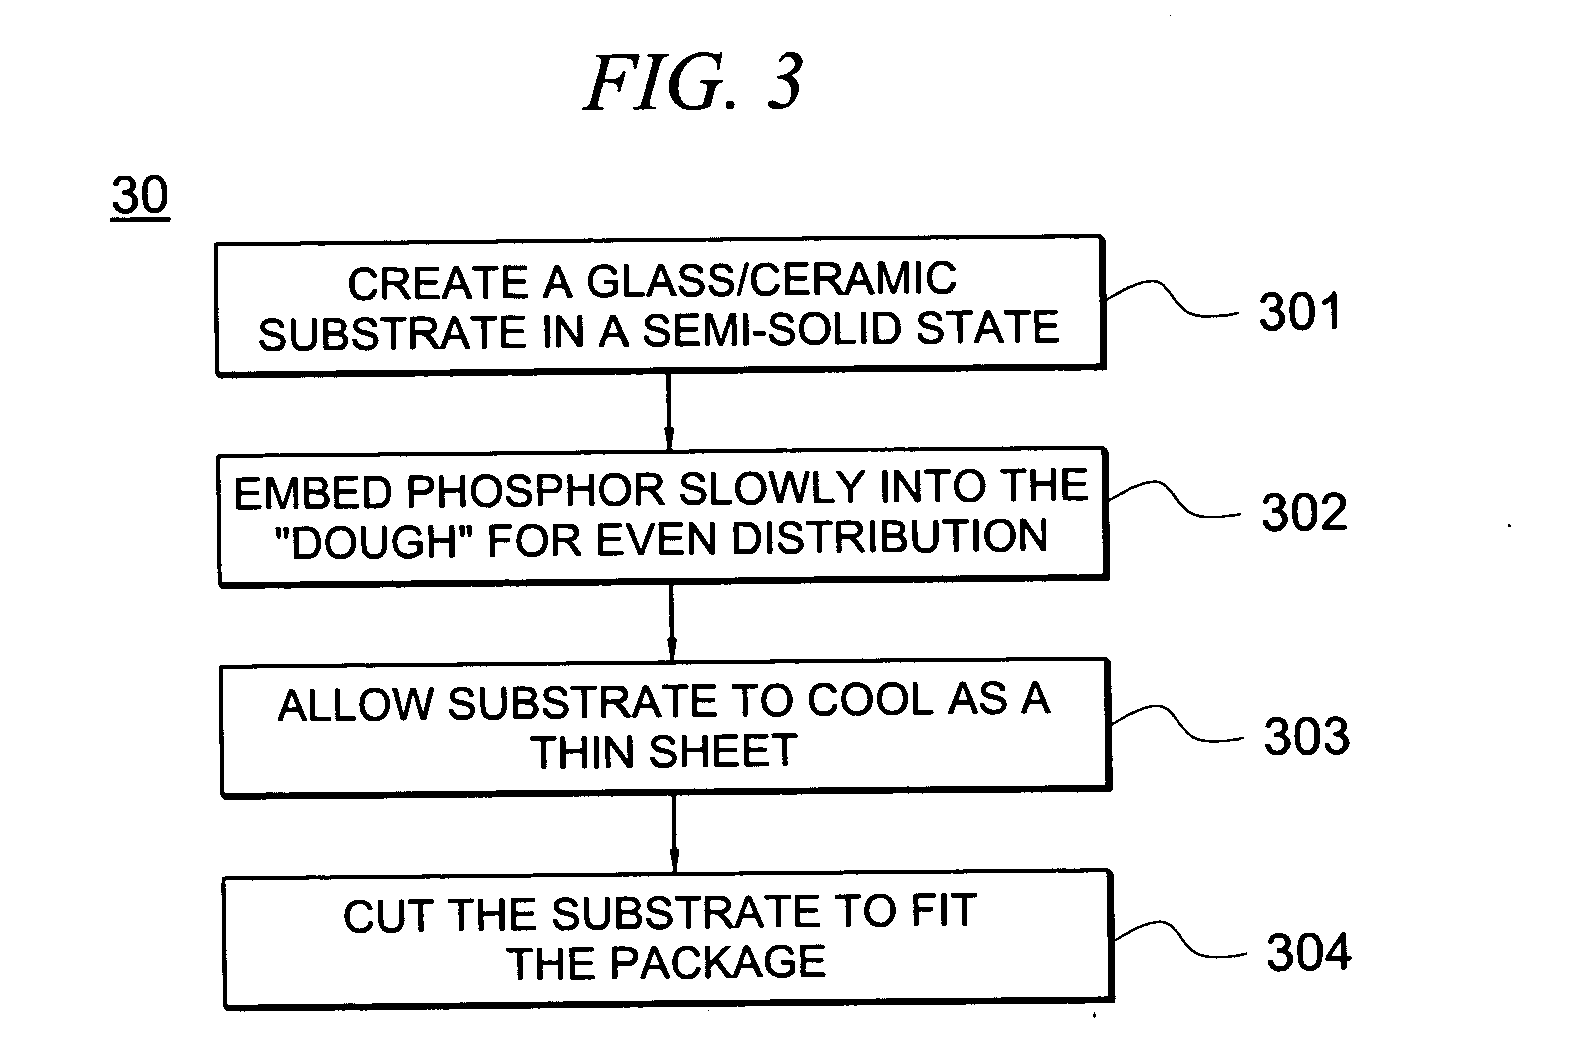 High light output lamps having a phosphor embedded glass/ceramic layer